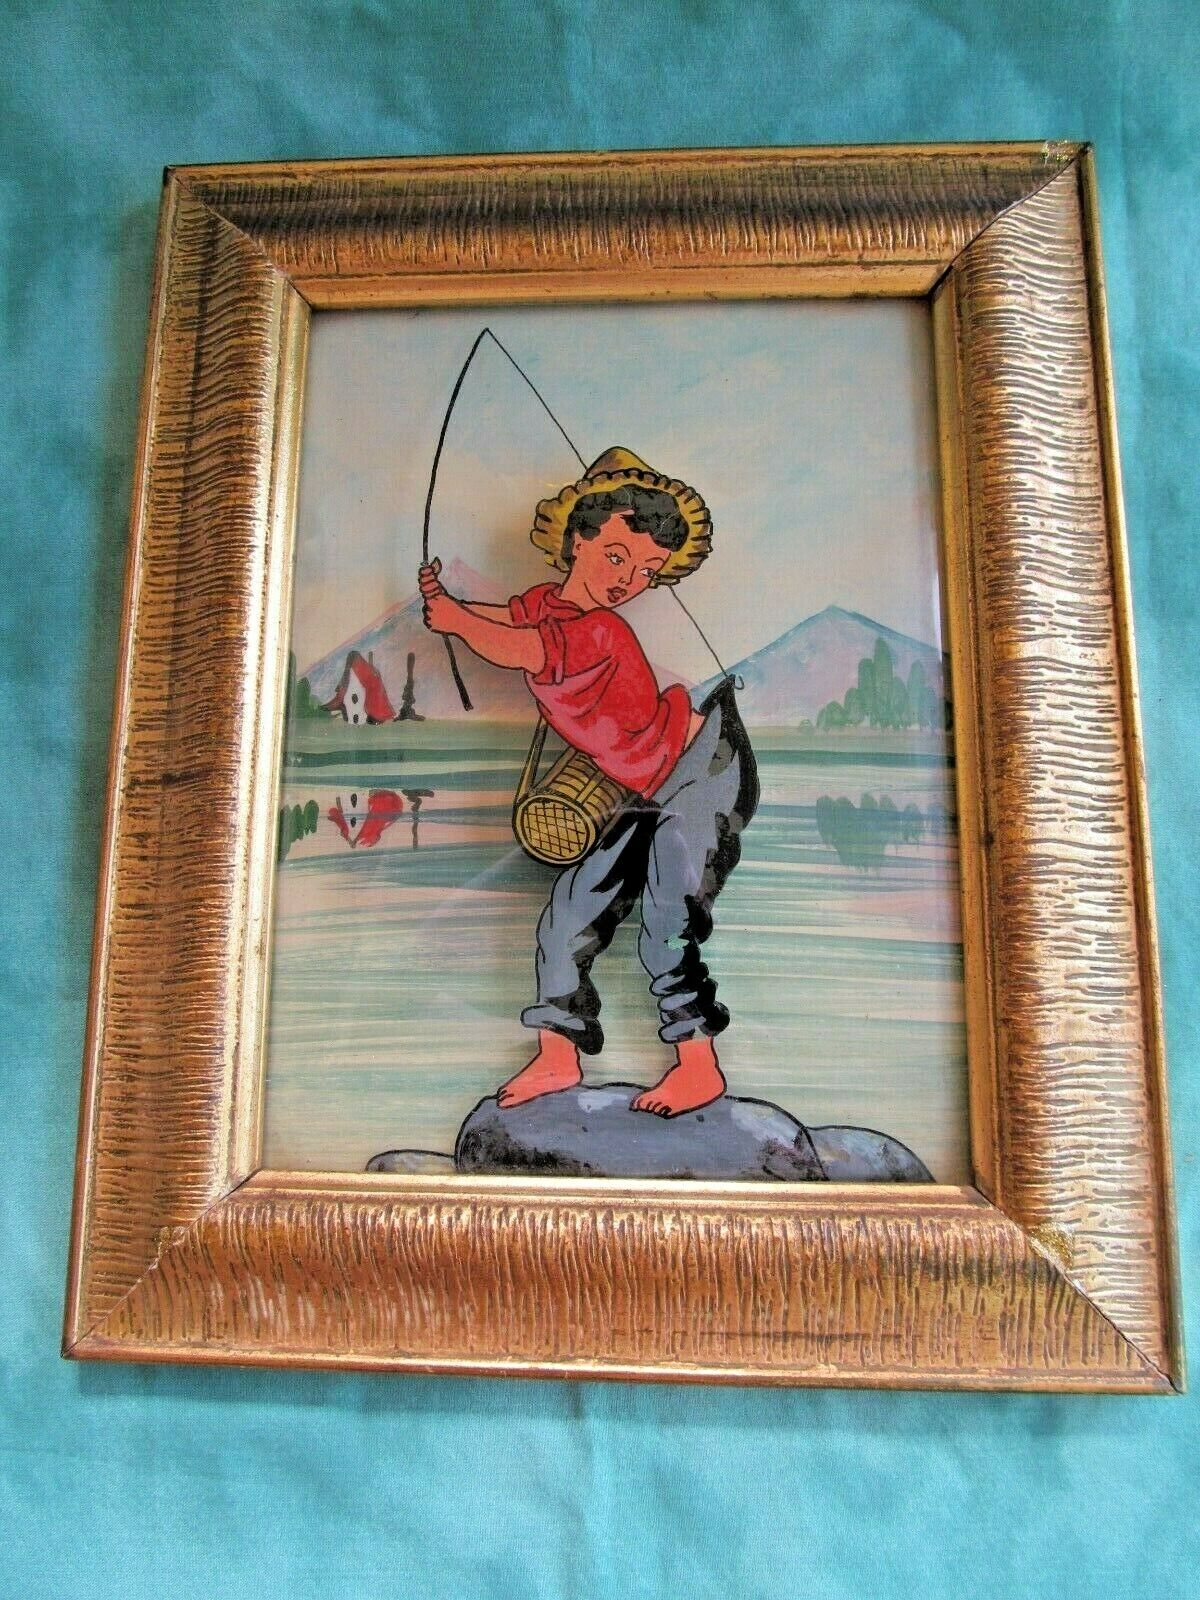 Vintage Fishing Boy - Reverse Painting on Glass